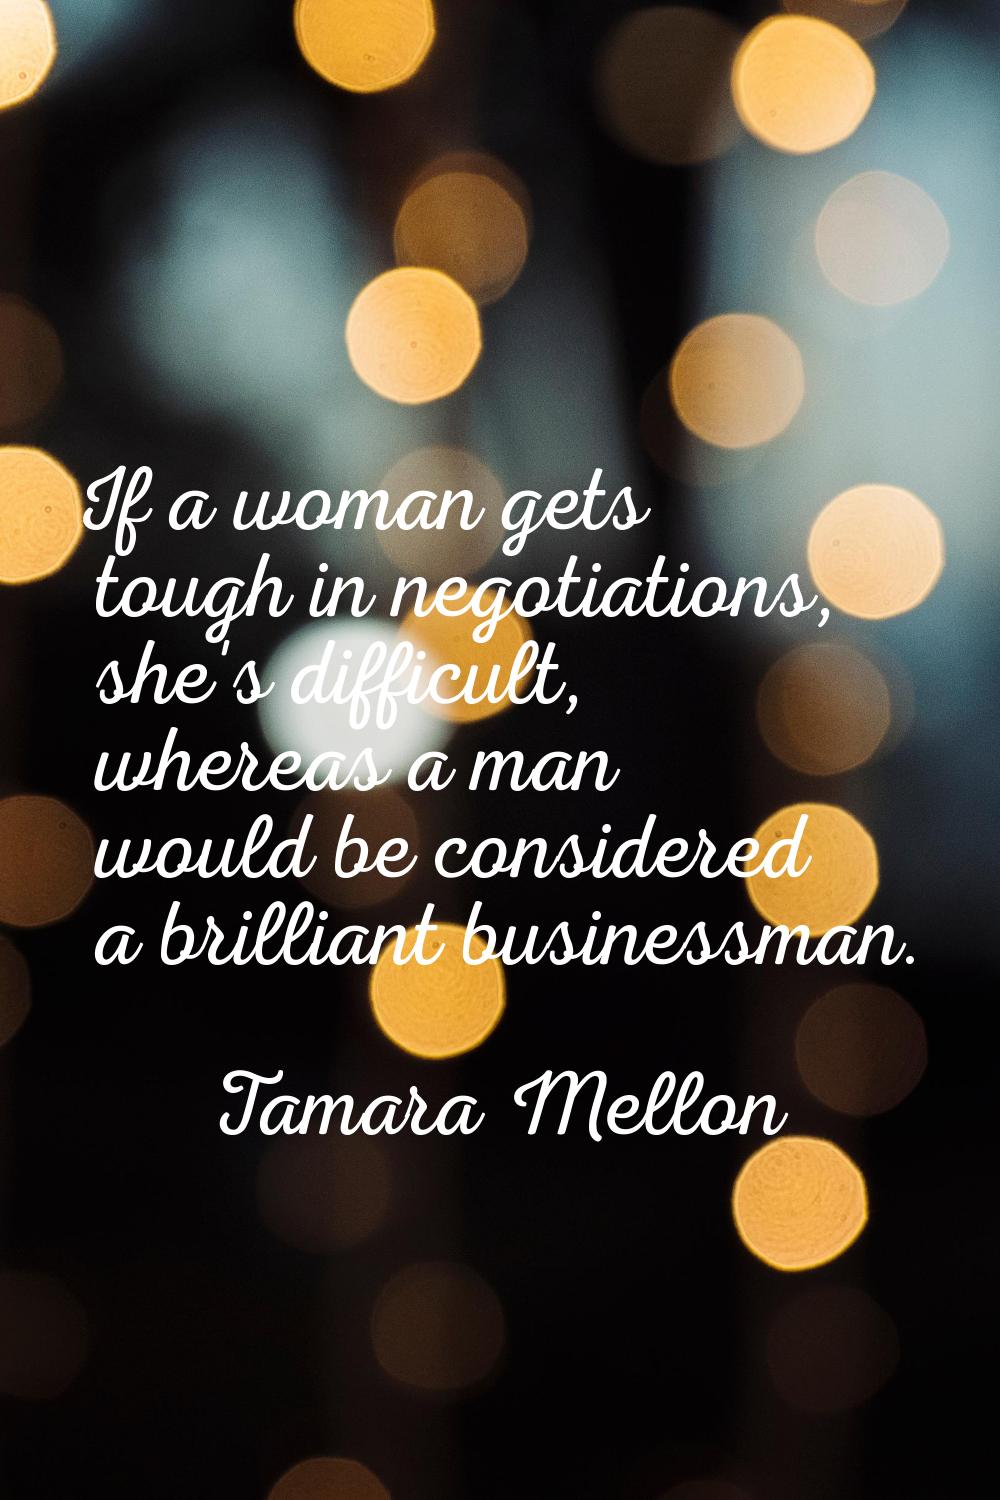 If a woman gets tough in negotiations, she's difficult, whereas a man would be considered a brillia